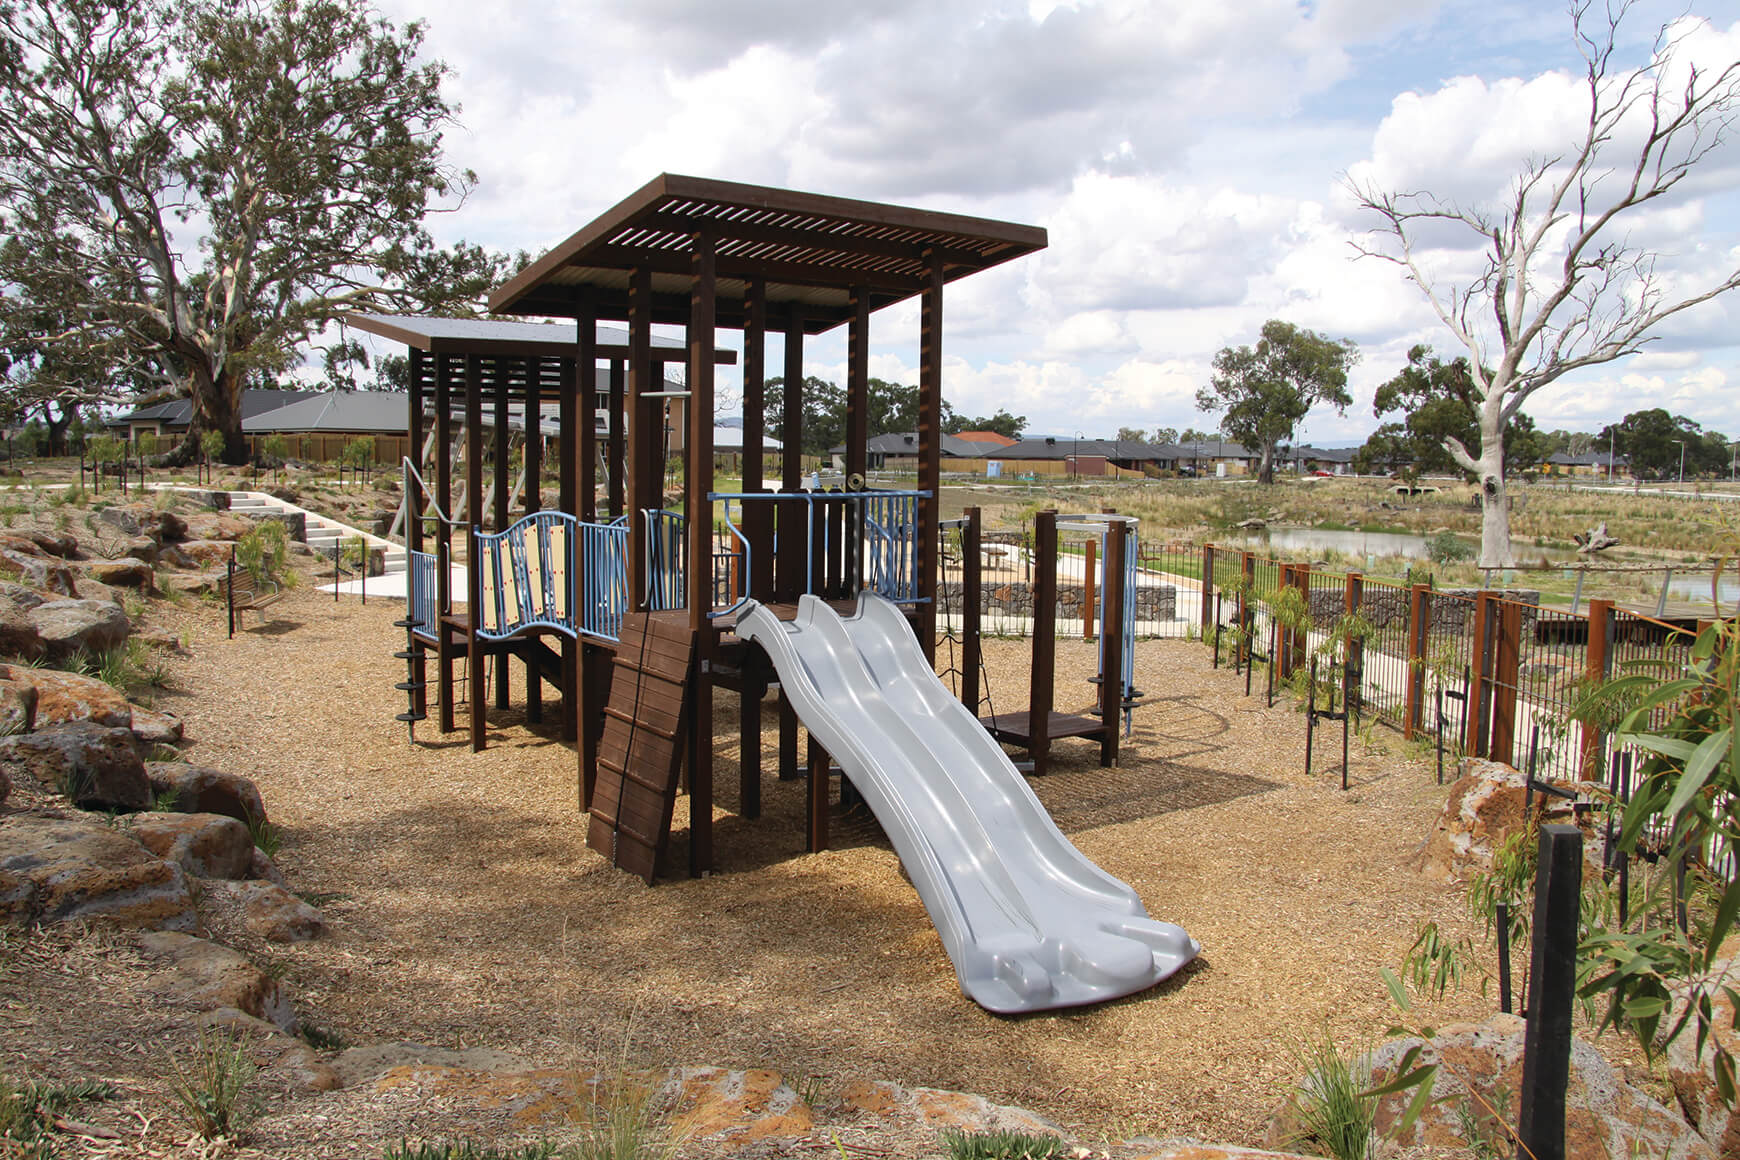 Why White Cypress Is Commonly Used for Playground Construction